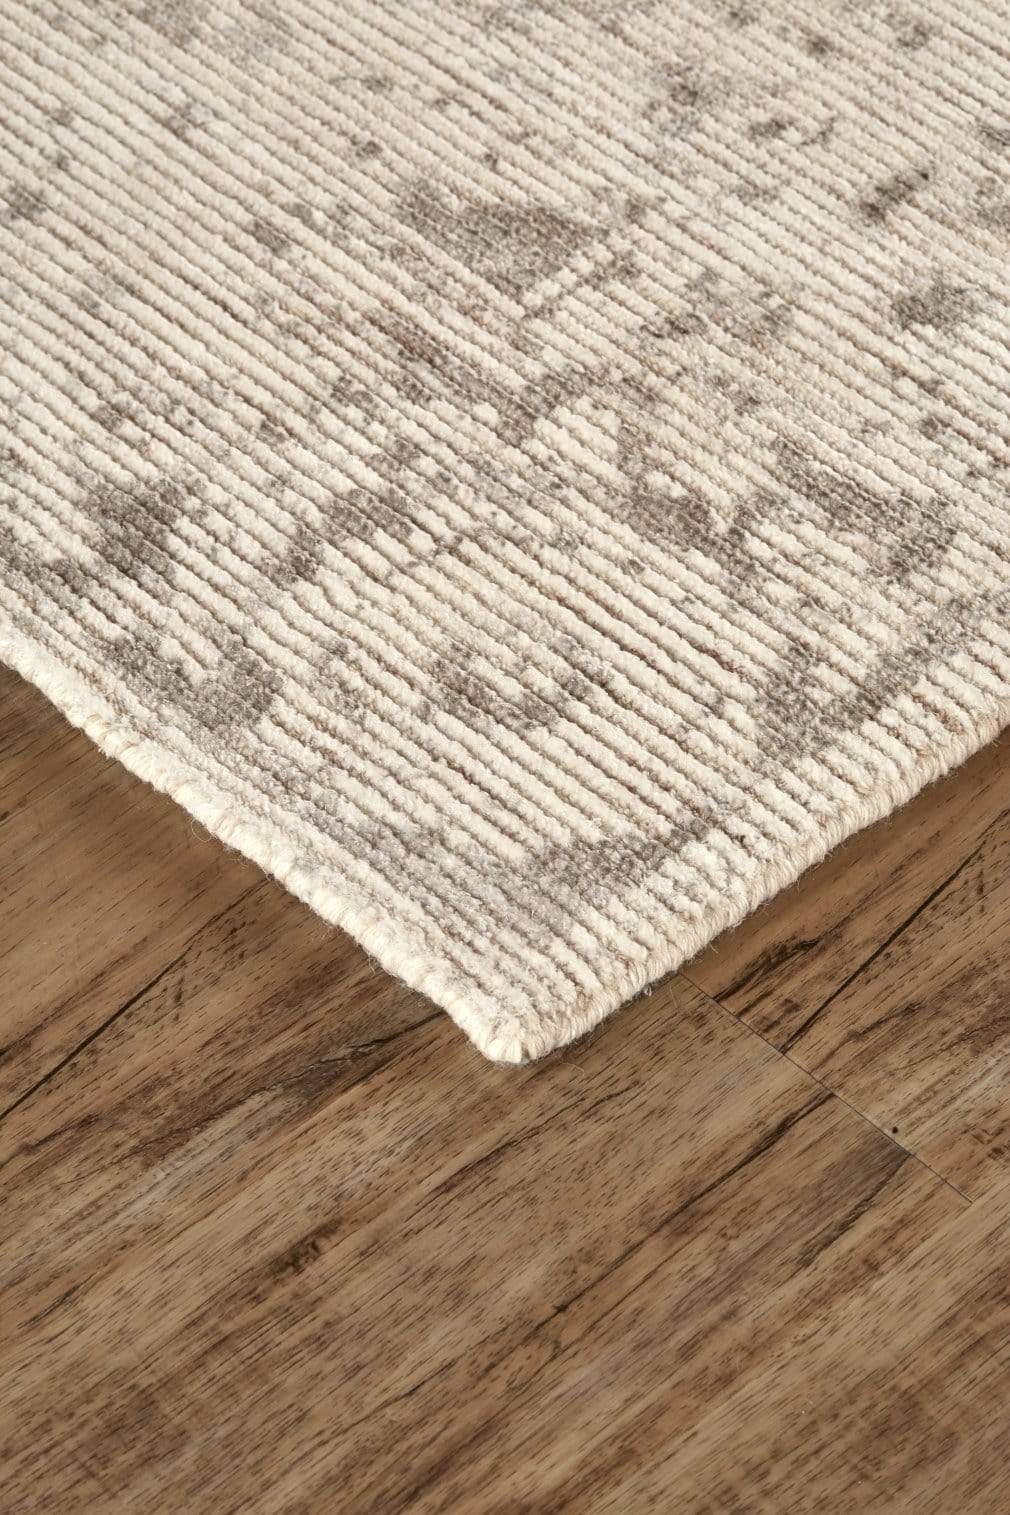 Feizy Feizy Reagan Distressed Ornamental Wool Rug - Beige & Natural Tan - Available in 5 Sizes